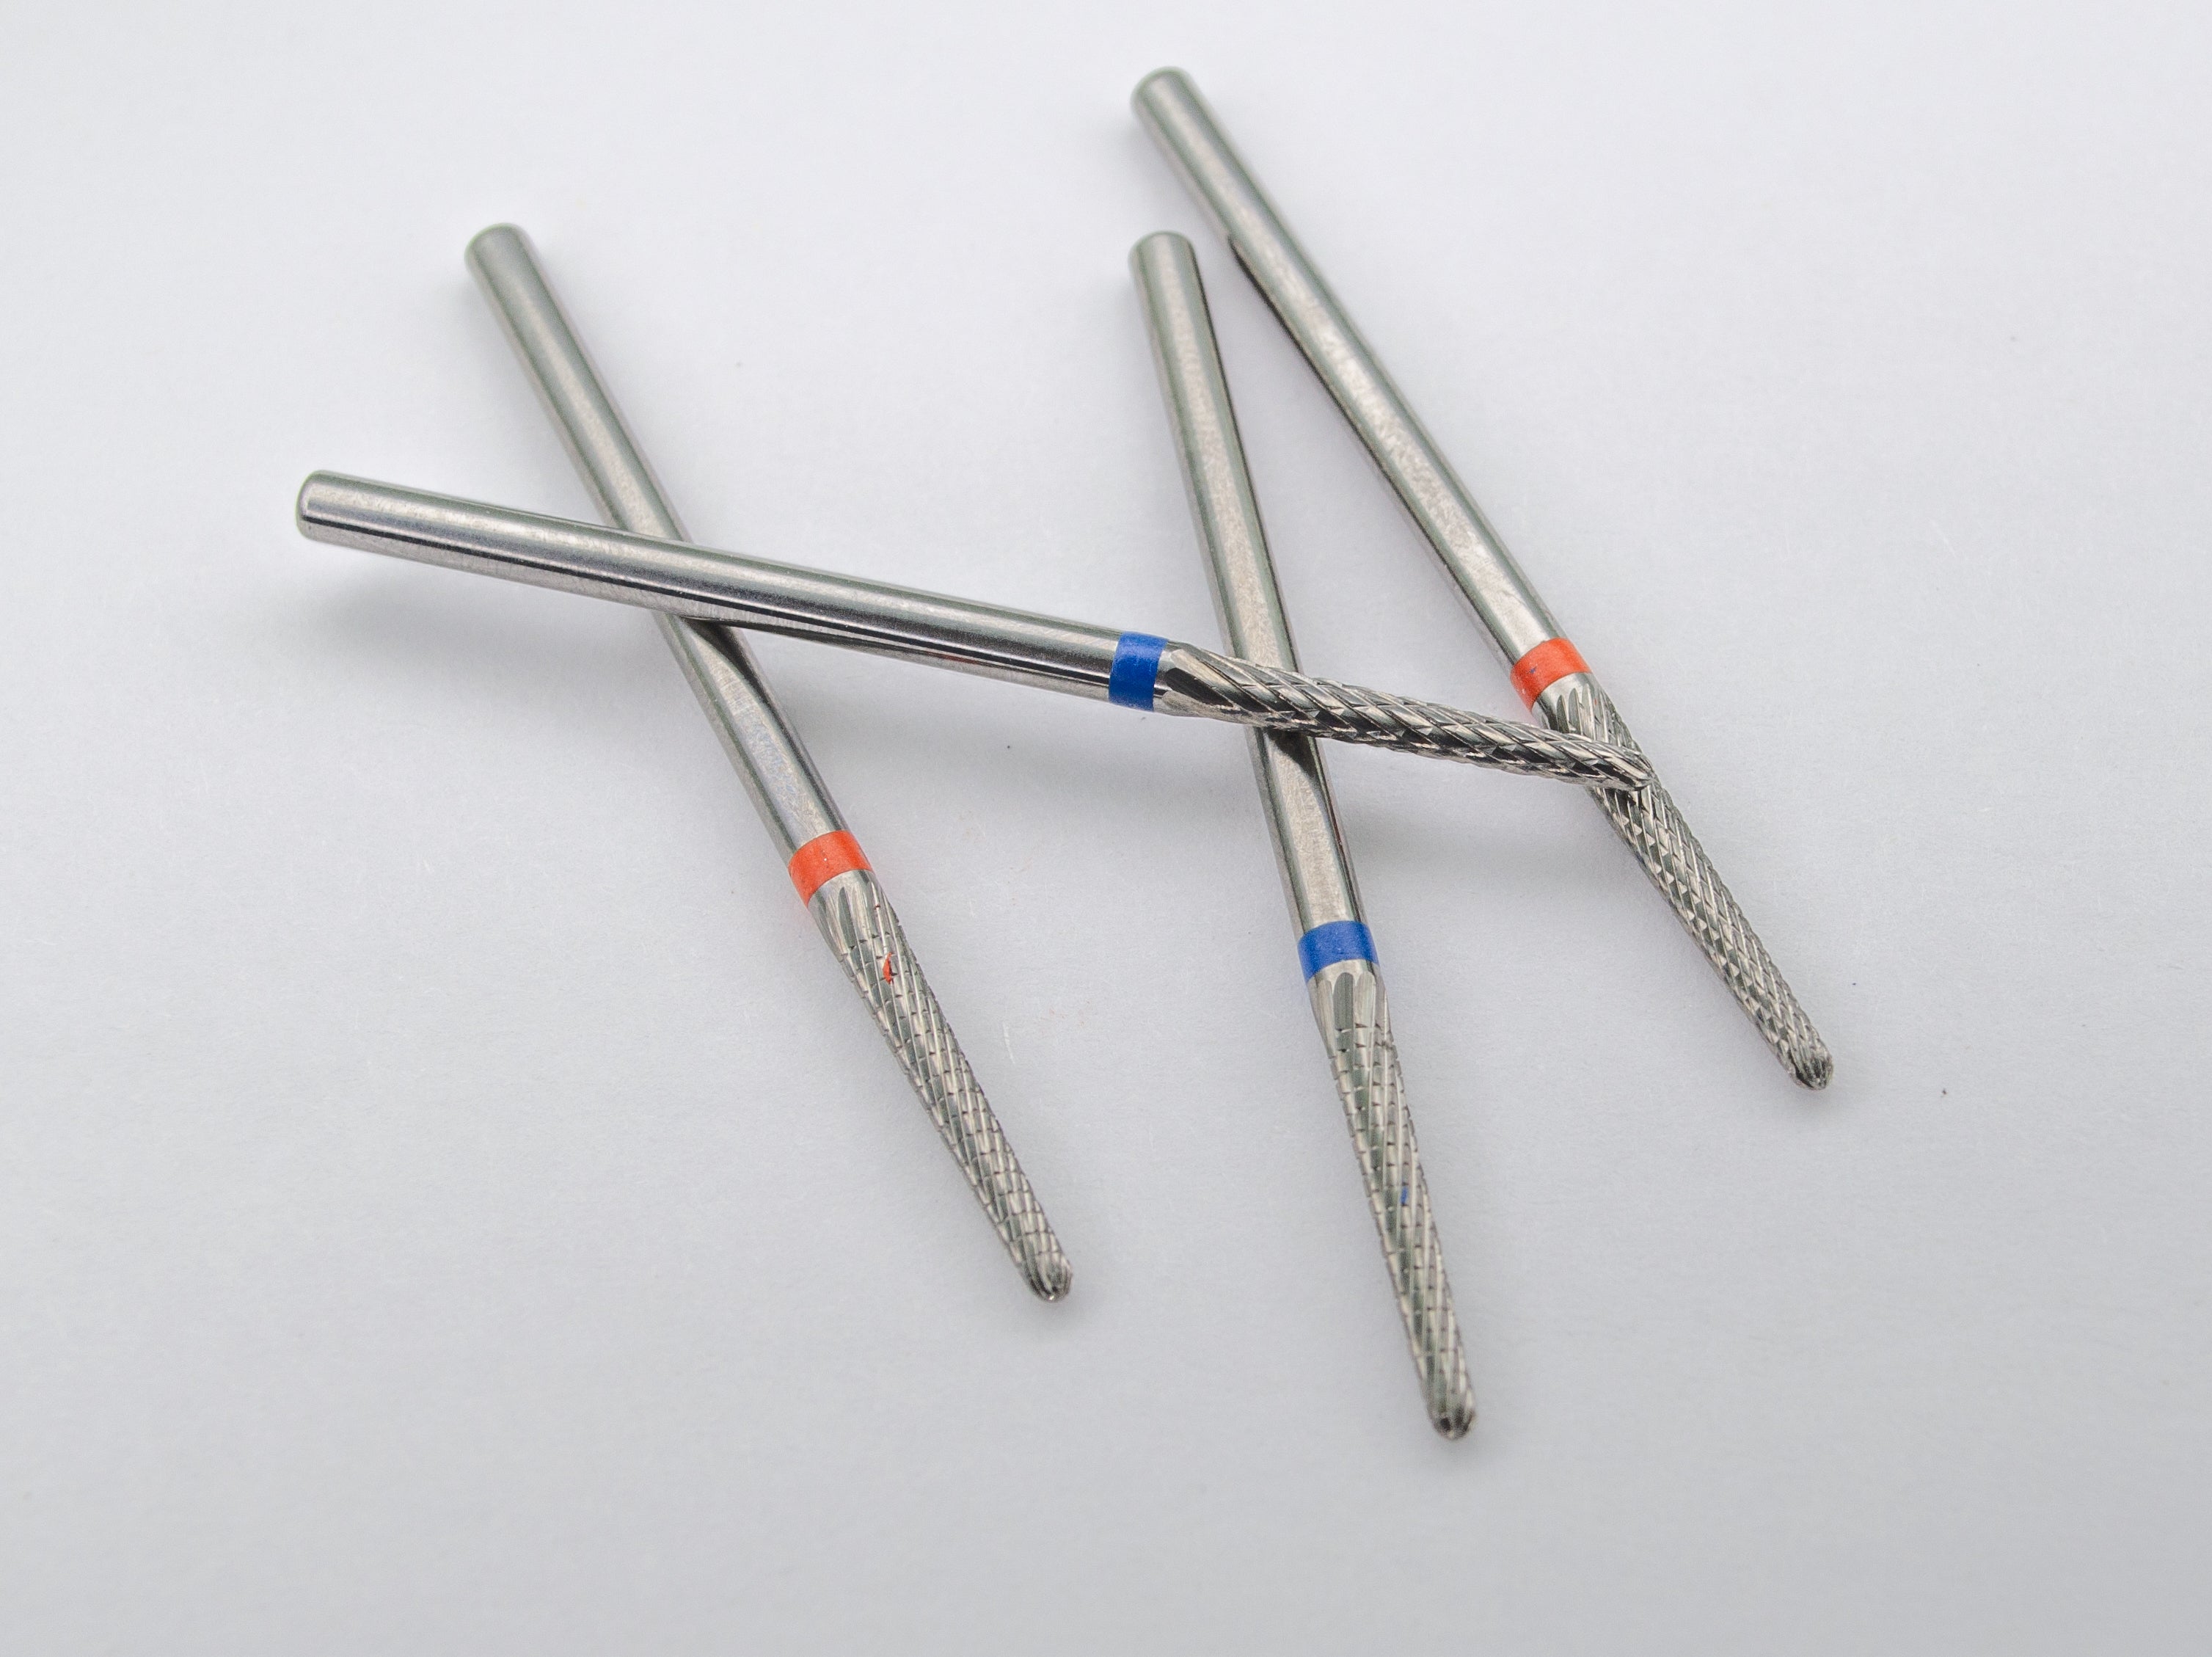 Solid-State Carbide Nail Drill Bits